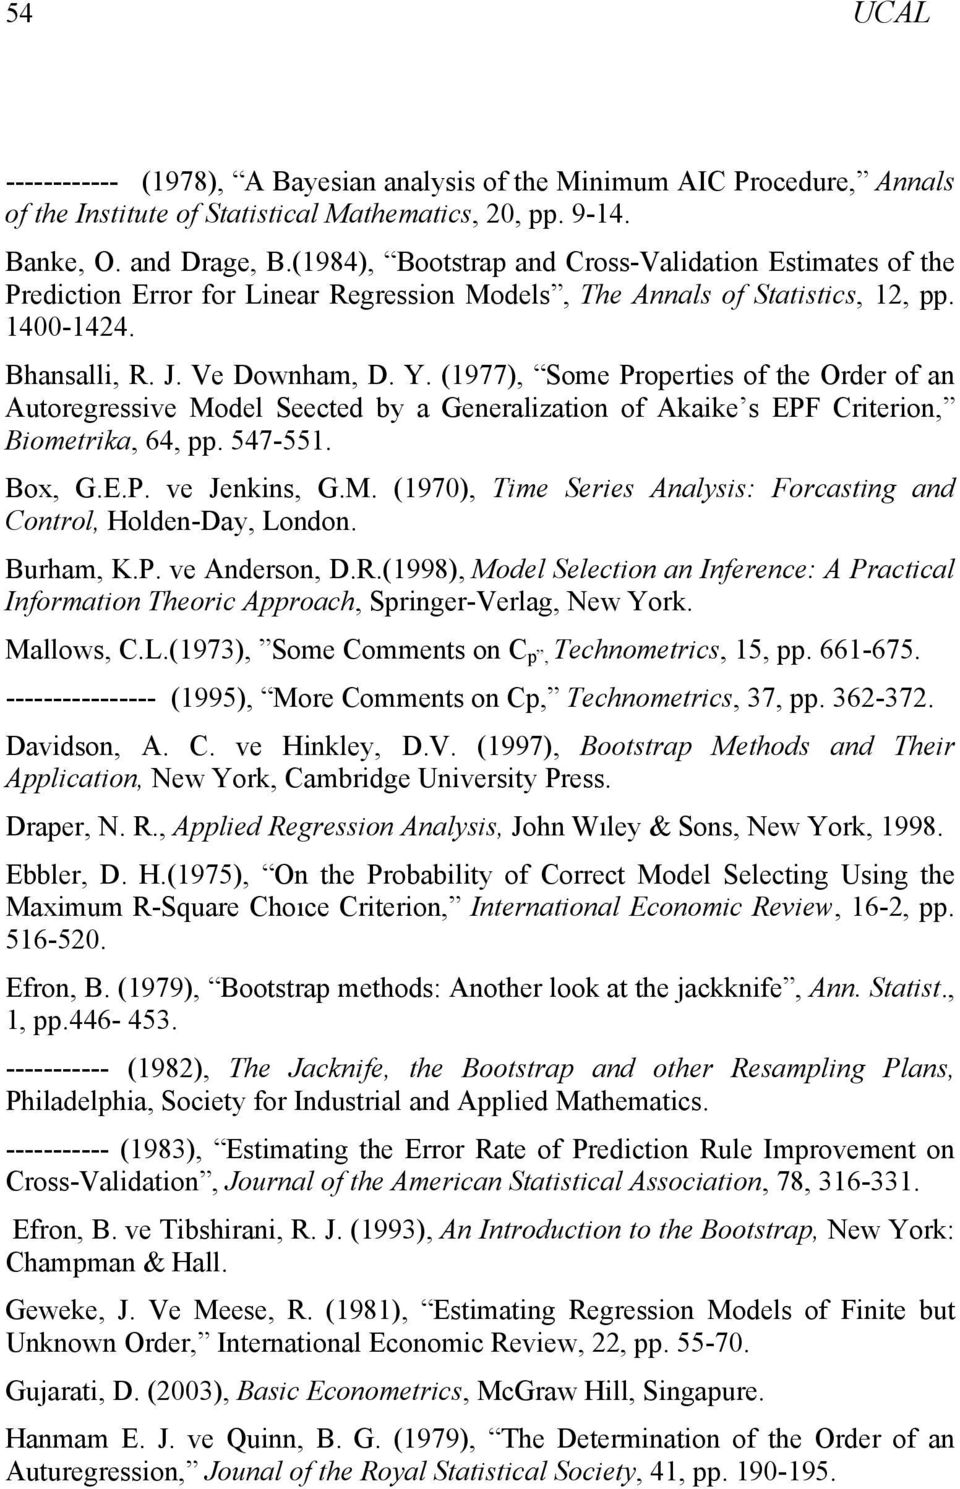 (1977), Some Properties of the Order of a Autoregressive Model Seected by a Geeralizatio of Akaike s EPF Criterio, Biometrika, 64, pp. 547-551. Box, G.E.P. ve Jekis, G.M. (1970), Time Series Aalysis: Forcastig ad Cotrol, Holde-Day, Lodo.